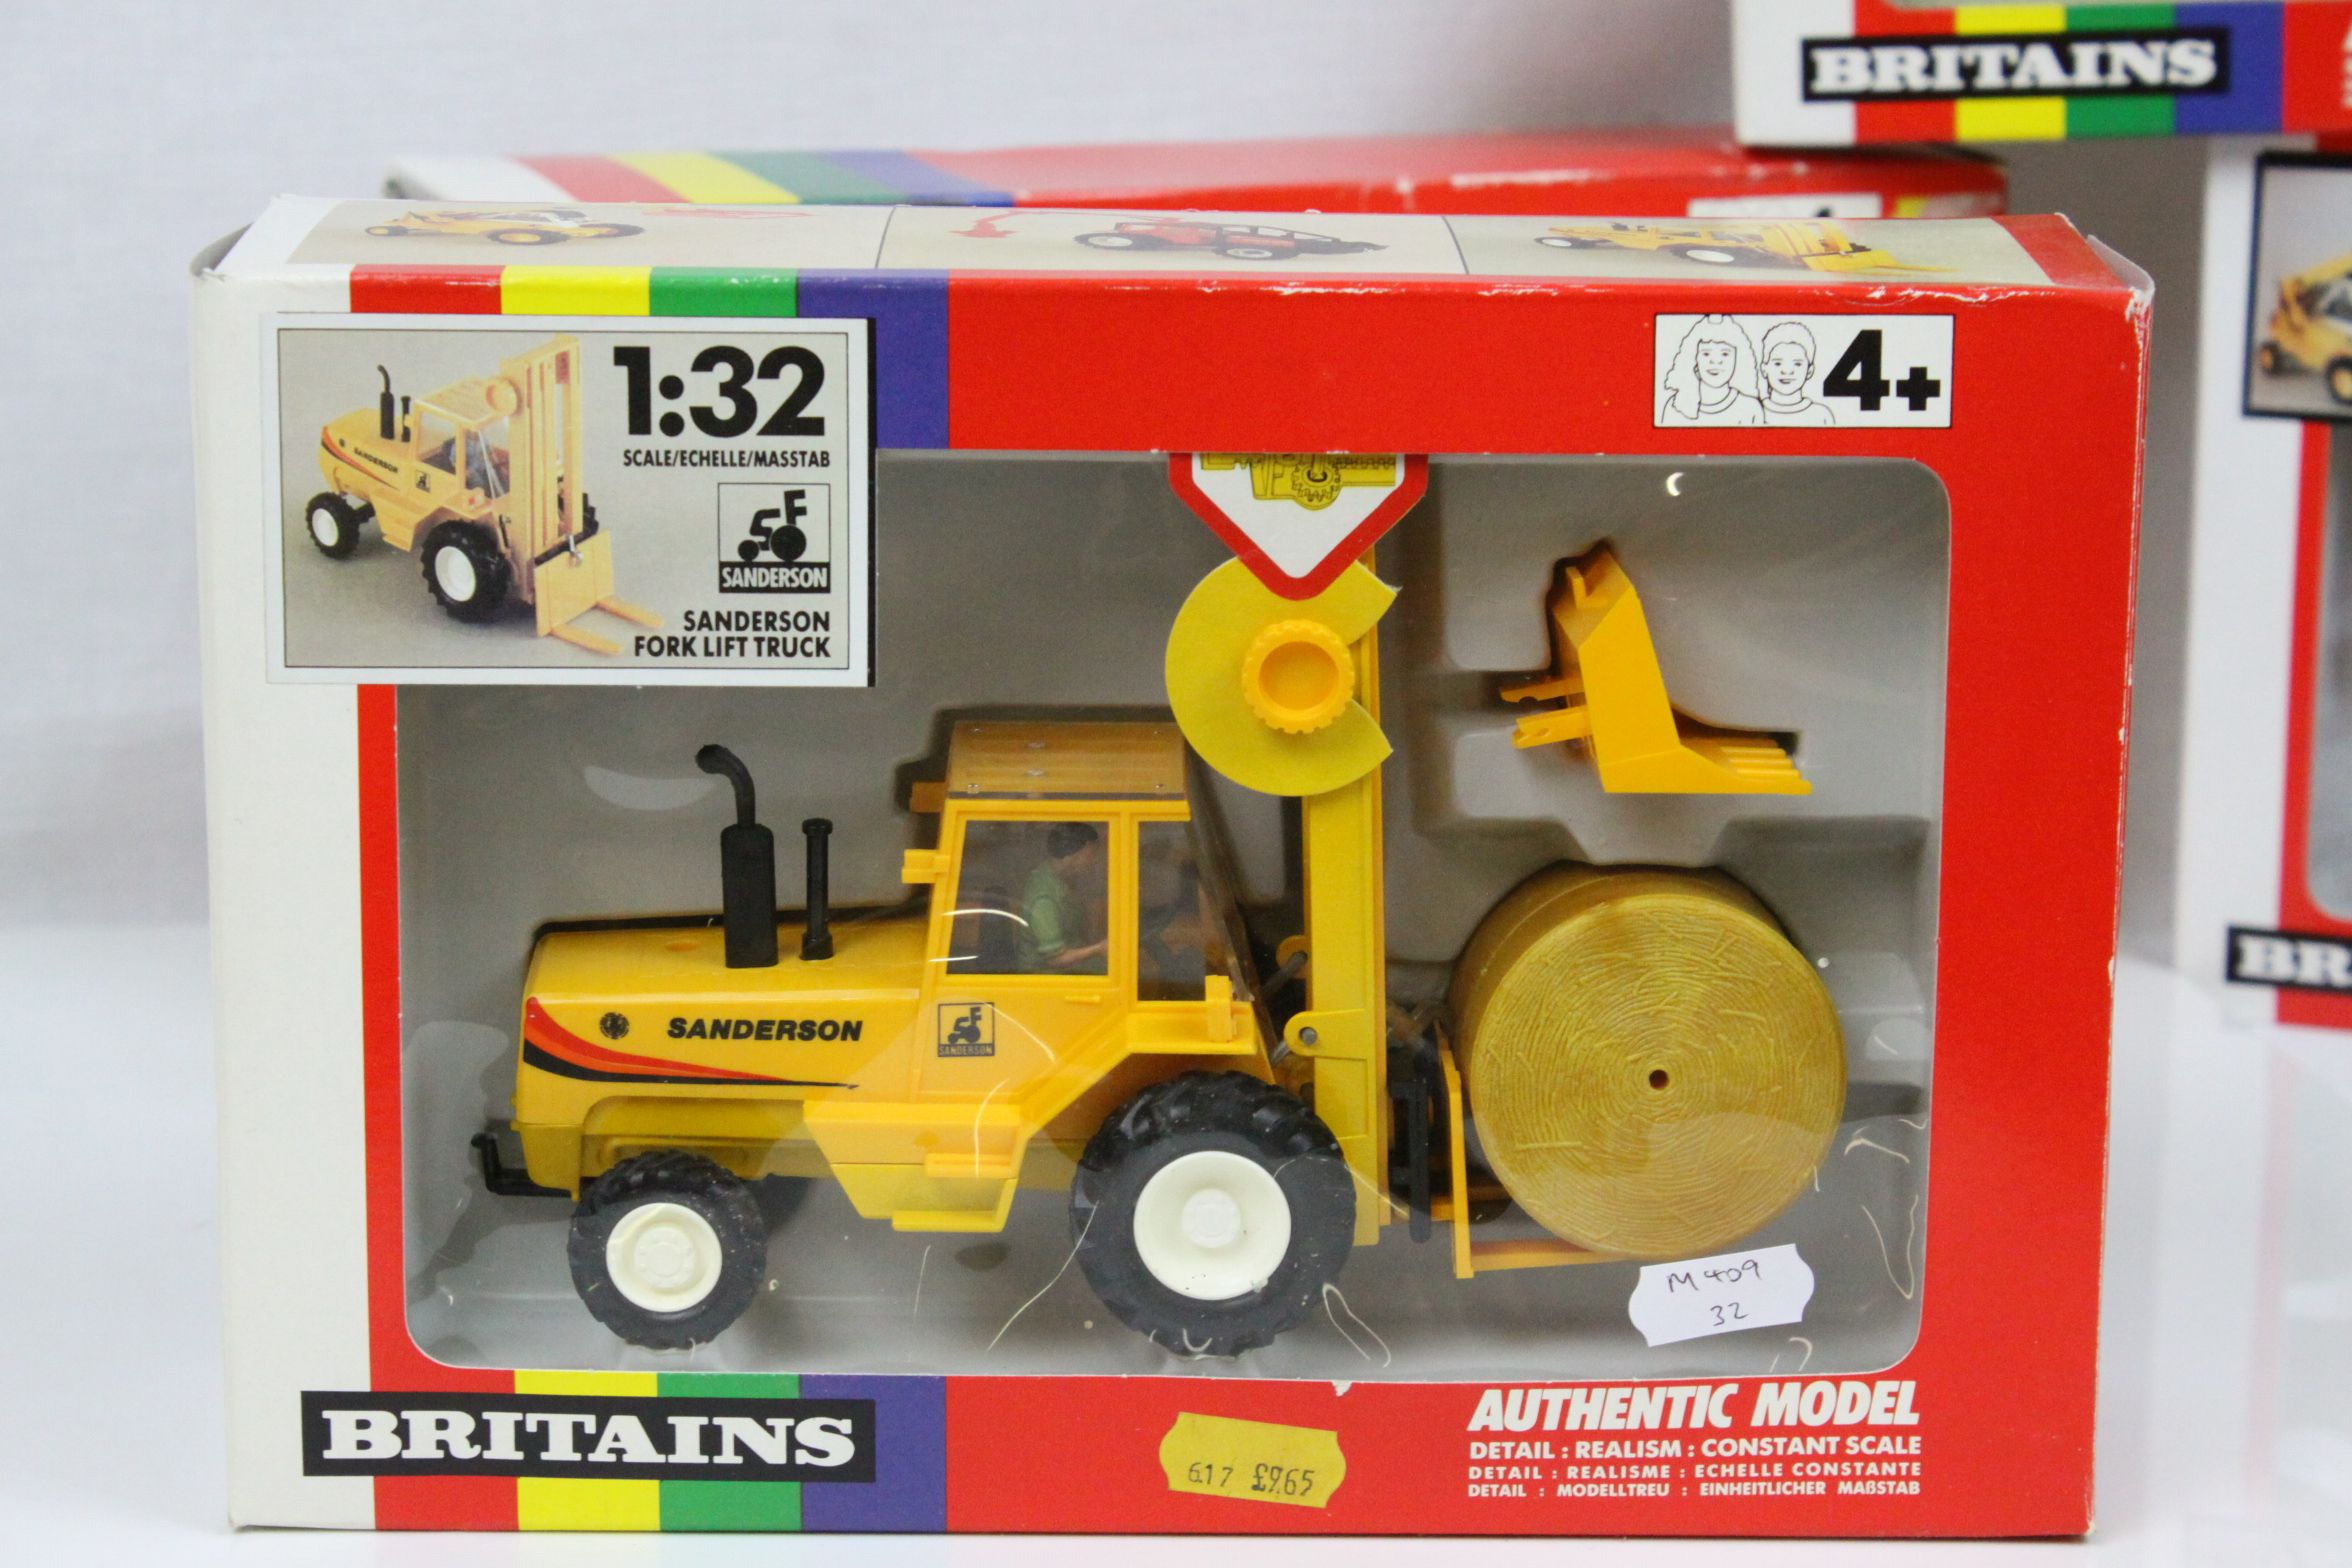 16 Boxed 1:32 Britains farming models to include 9566, 9559, 9539, 9548, 9547, 9574, 9509, 9519, - Image 21 of 27